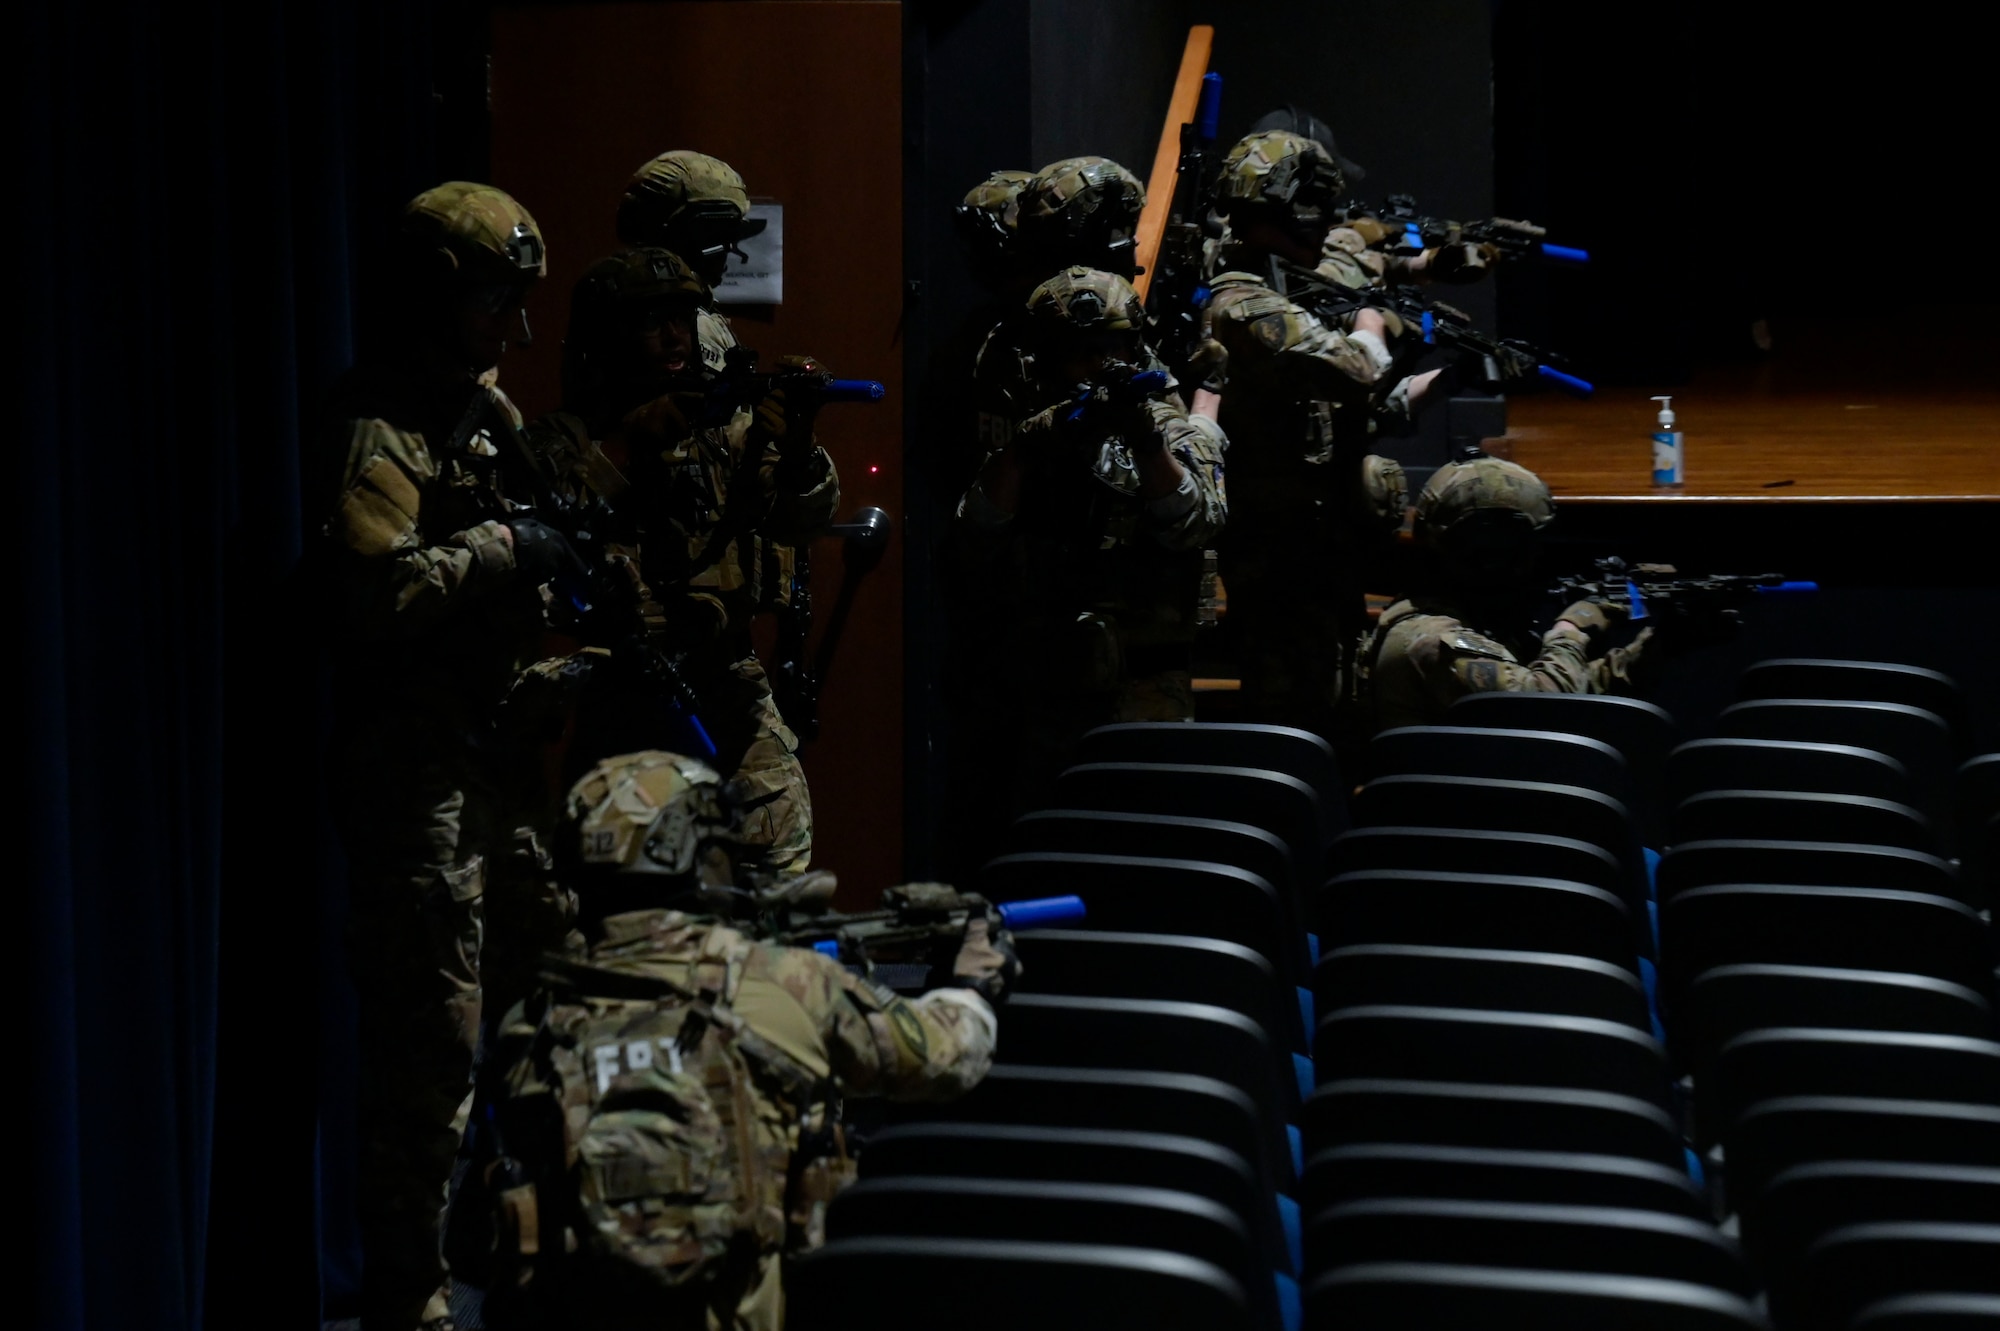 Members of the Federal Bureau of Investigation SWAT team clear a building